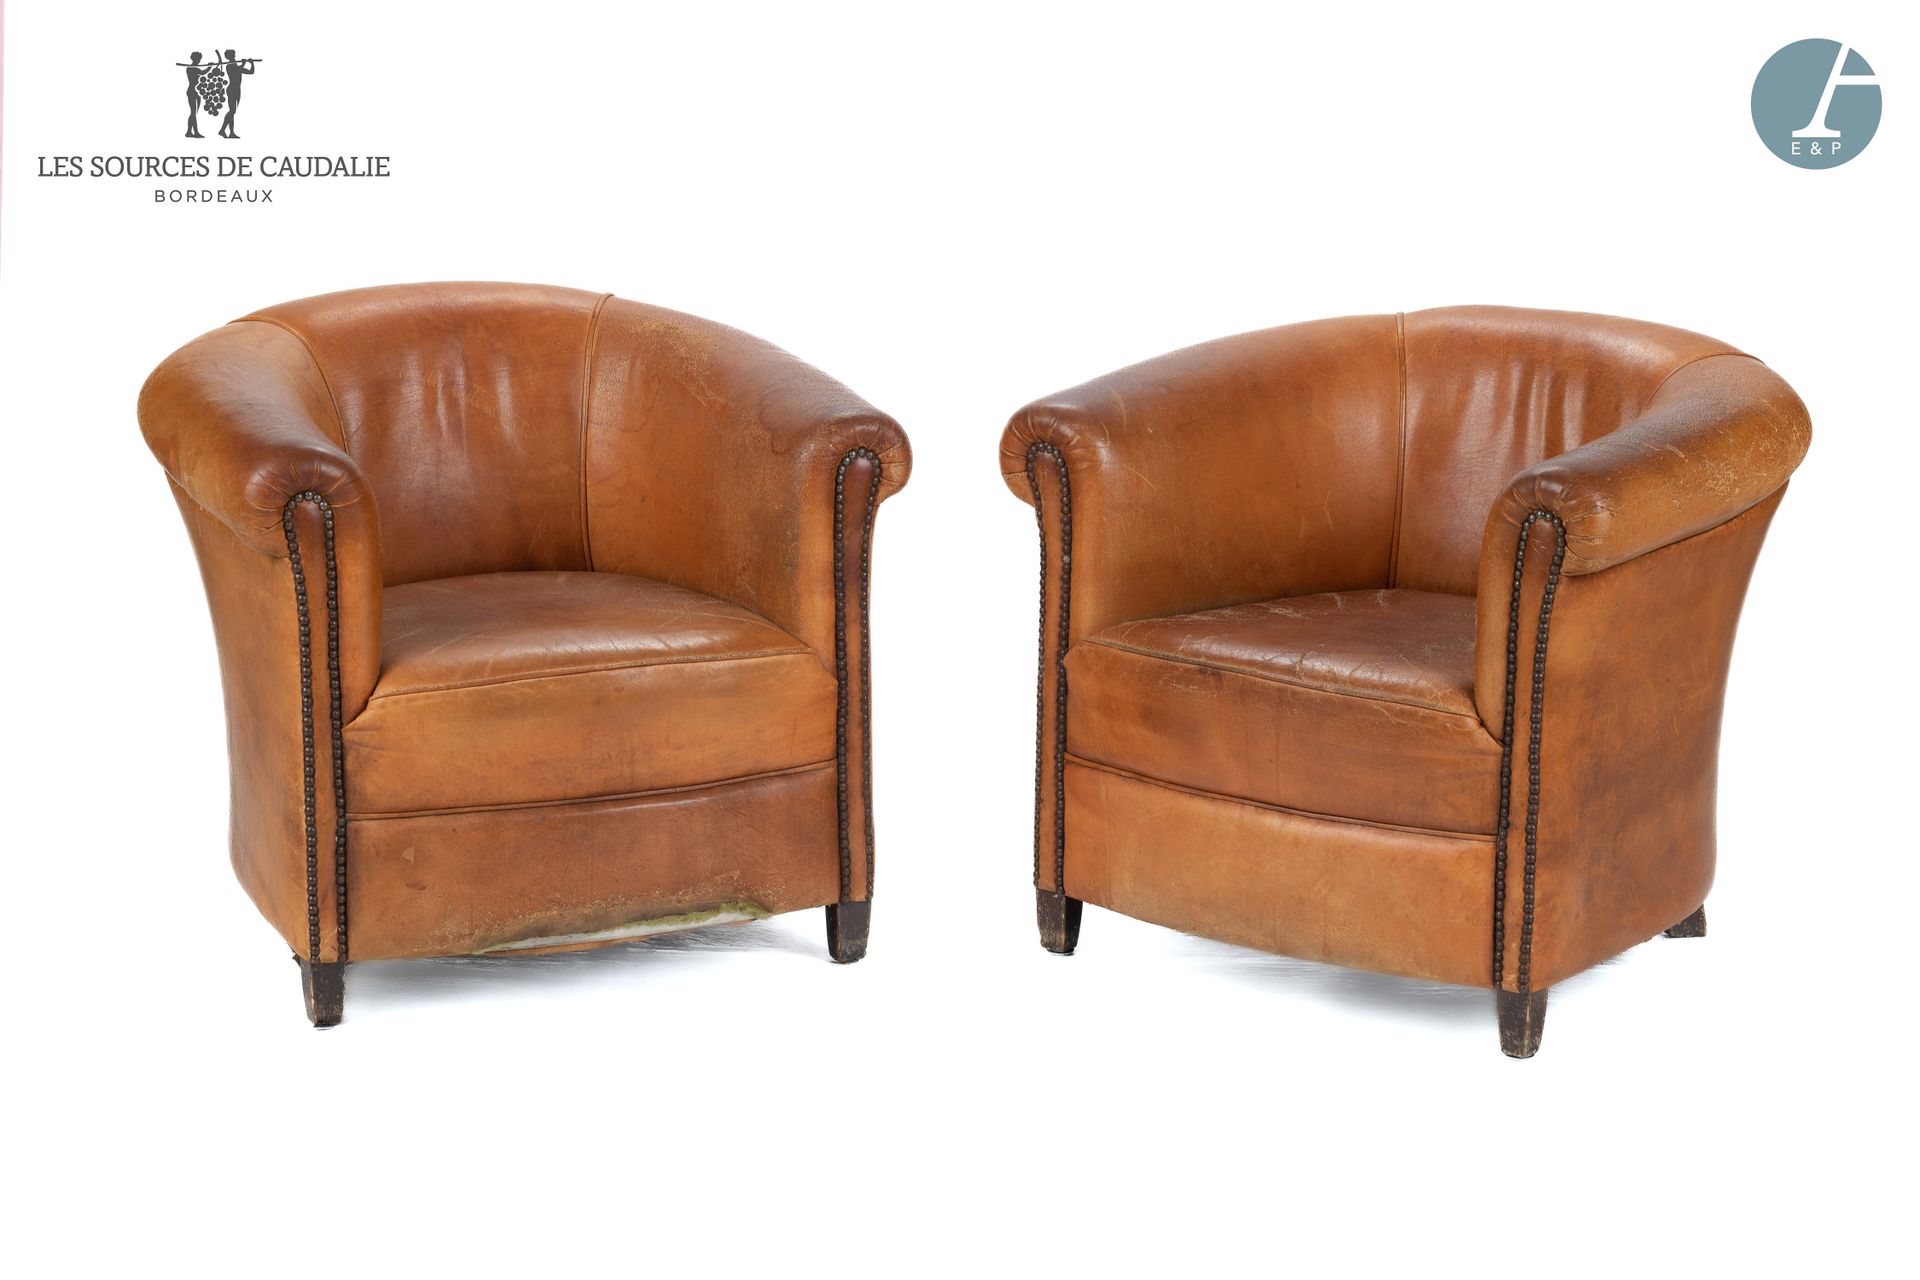 Null From the Sources de Caudalie
Pair of brown leather club chairs
Condition of&hellip;